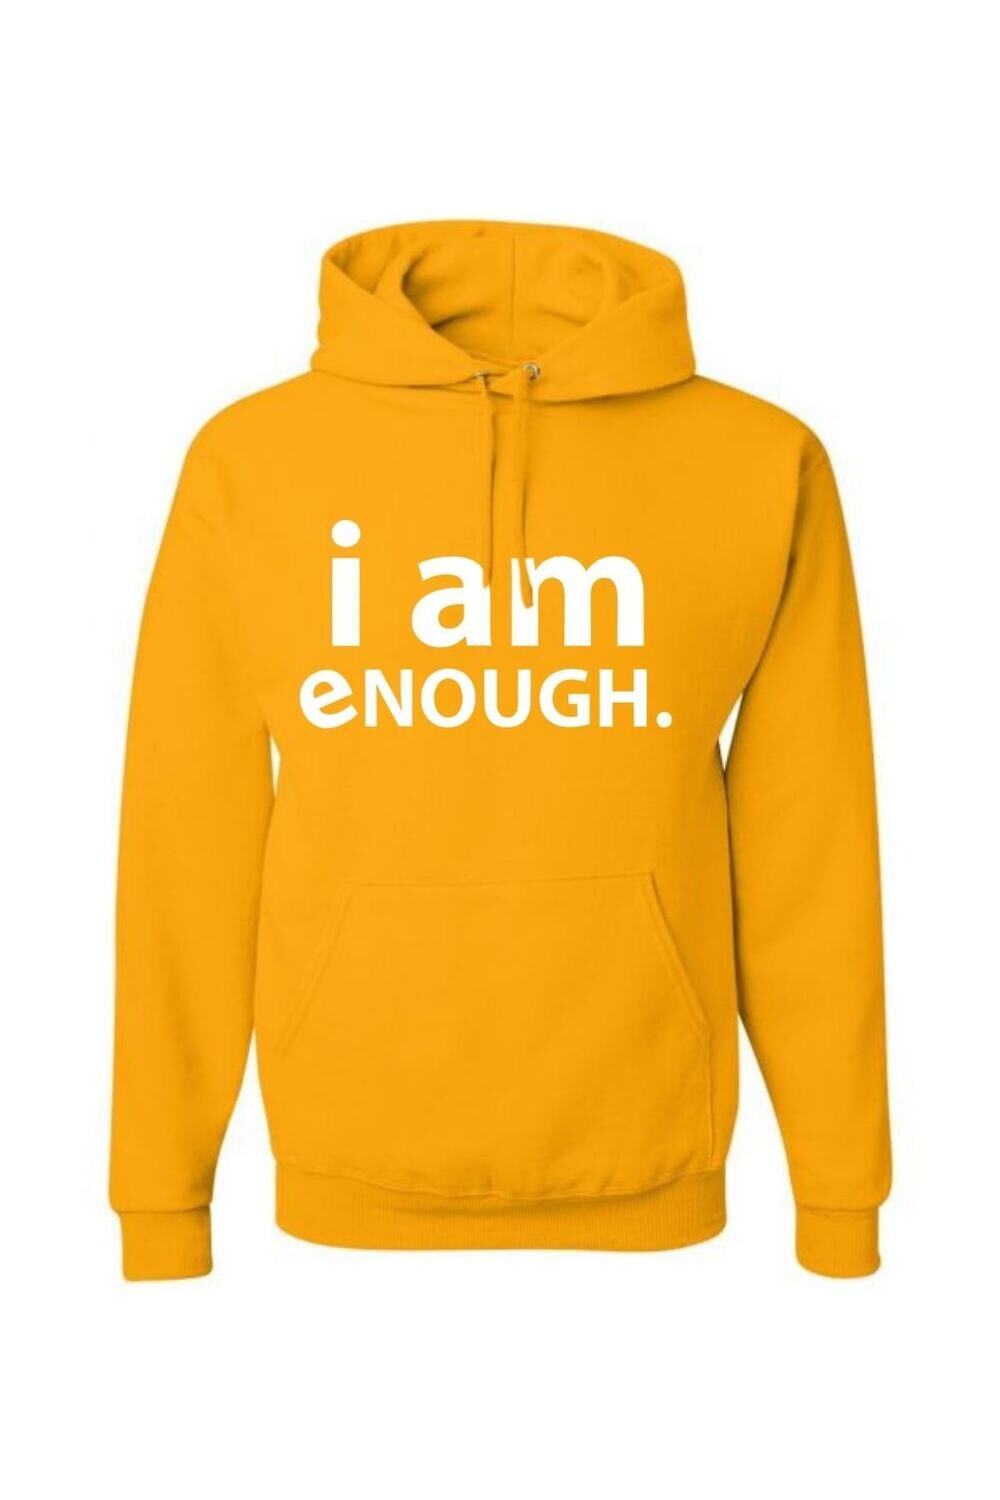 I AM ENOUGH Unisex Gold Hoodie